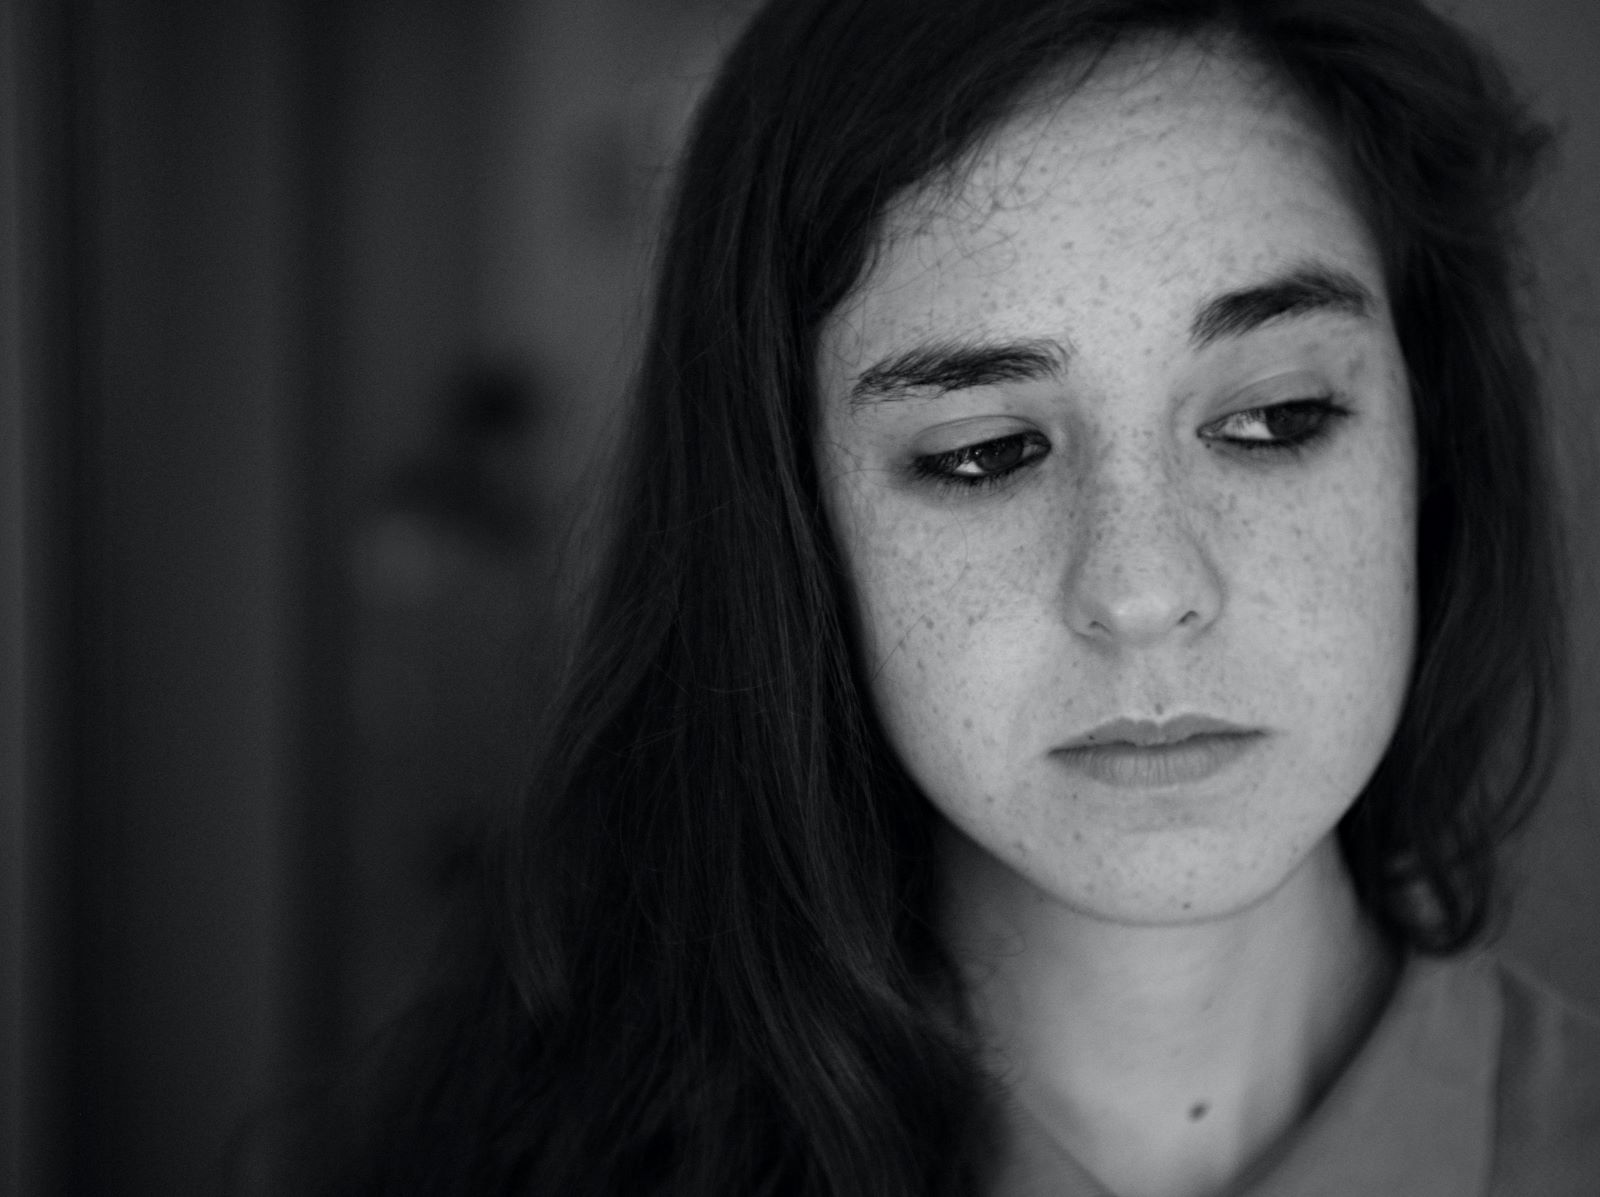 How To Get Depression Treatment For Teens